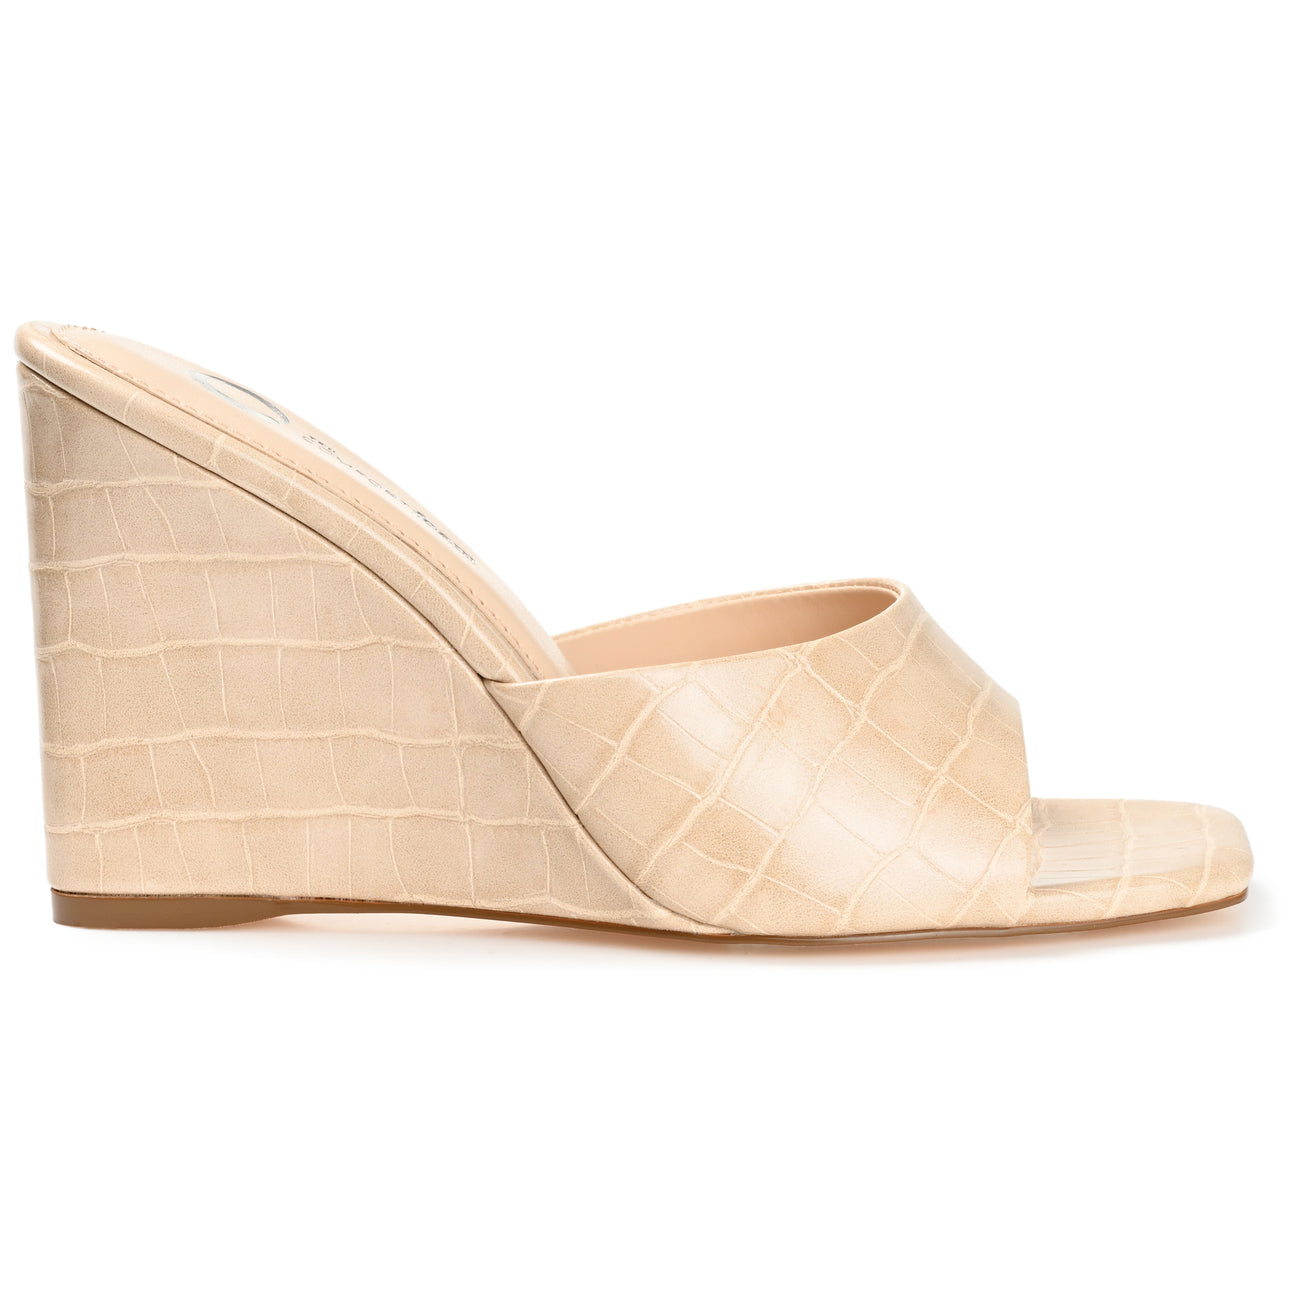 Women's Wedge Heels | Slip-On, Ankle Strap & More | Journee Collection